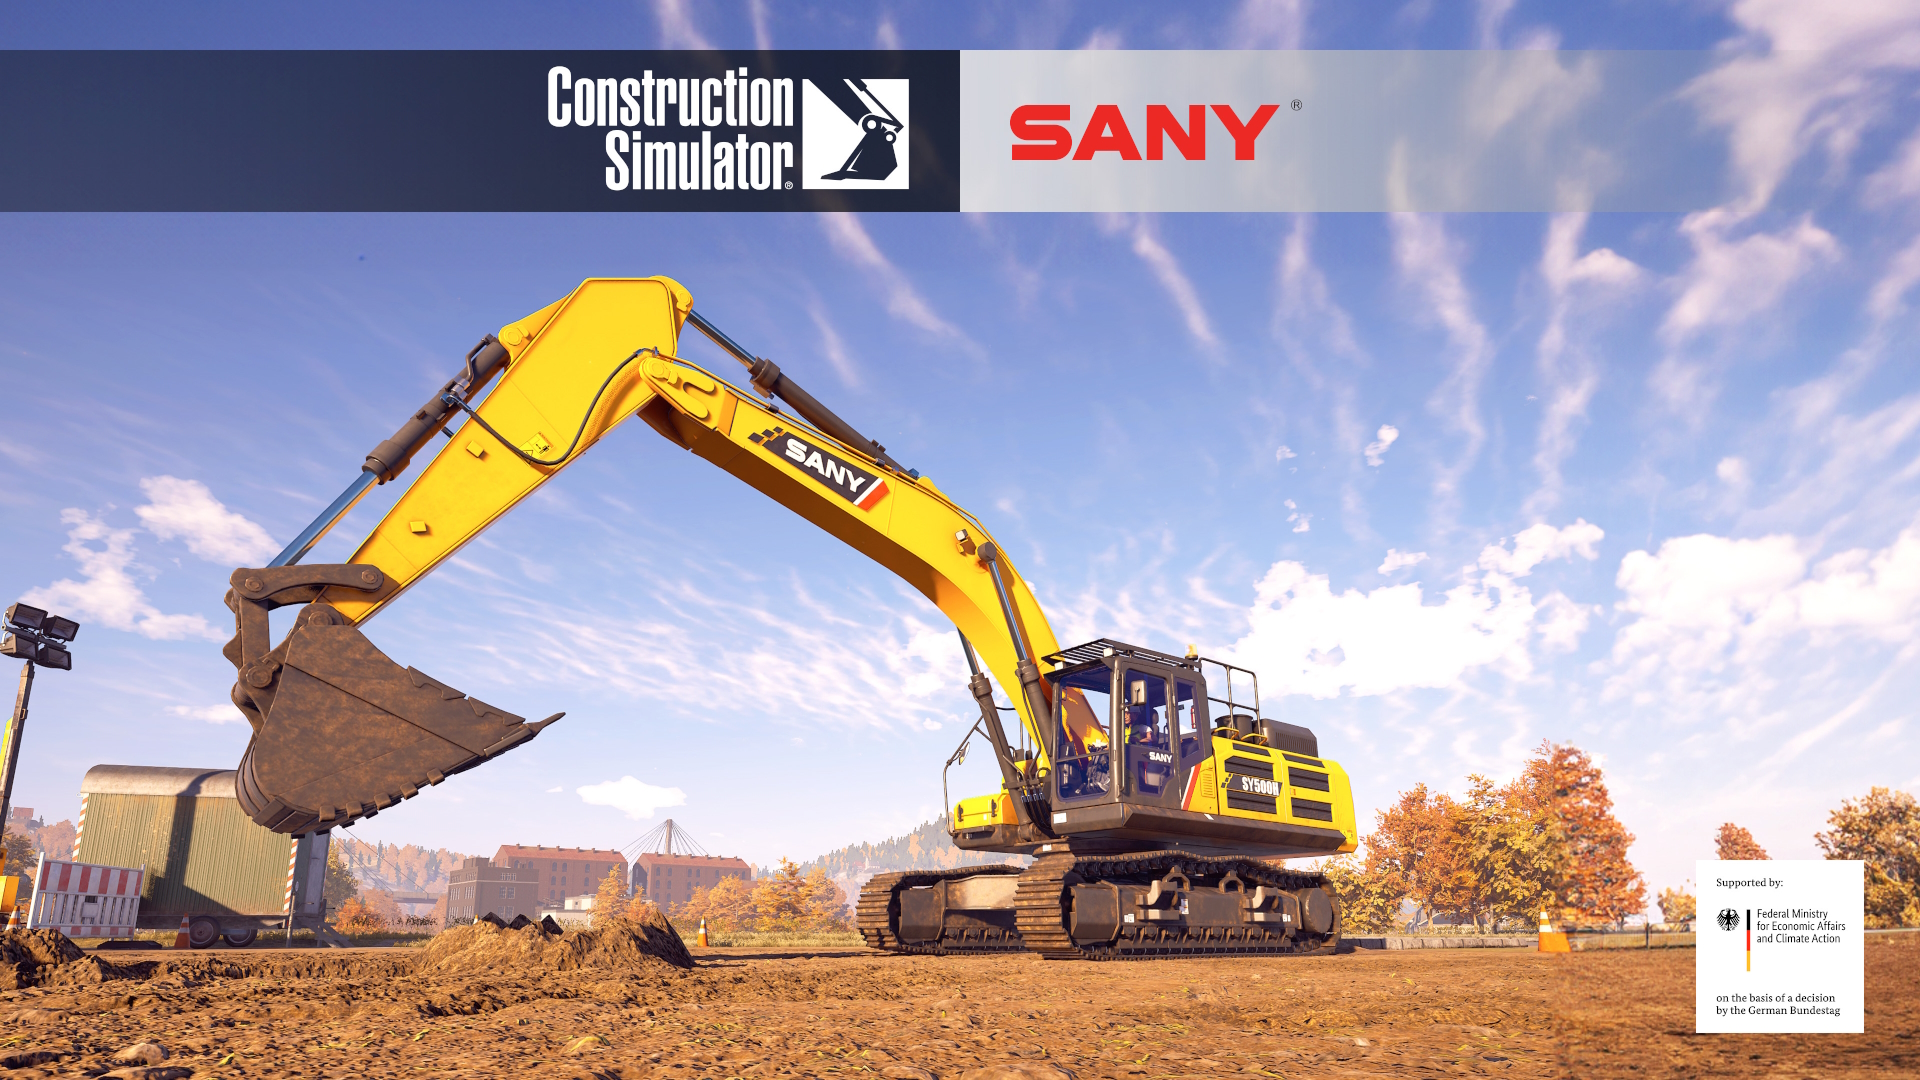 Construction Simulator® - SANY Pack with 15 new construction machines  announced!